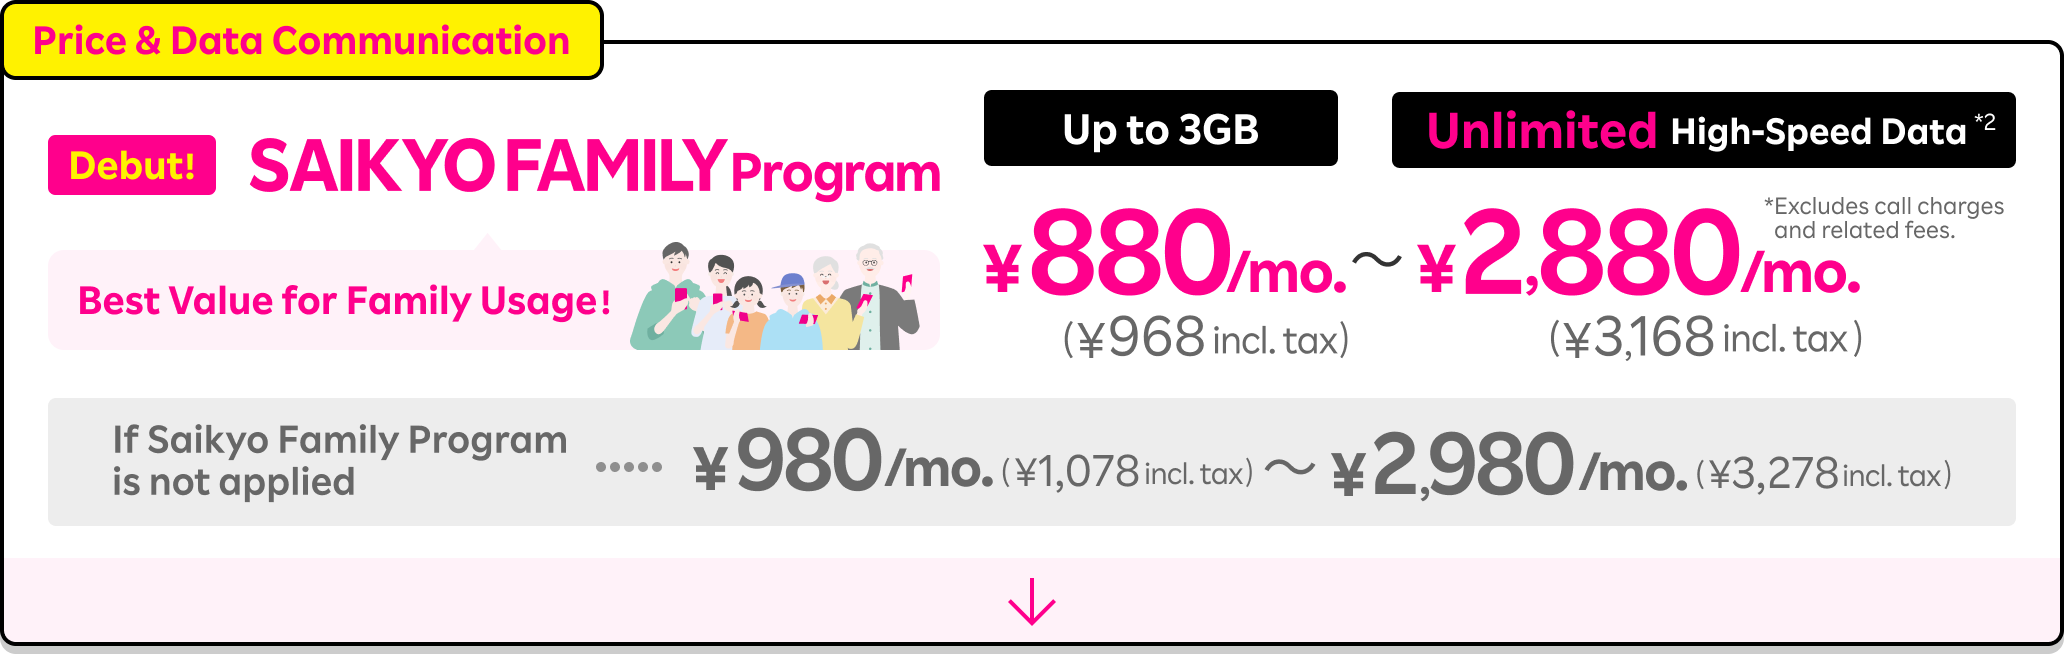 Price & Data Communication: The powerful program arrives to boost family savings! With the family discount applied, 880 yen/mo. (968 yen incl. tax) for up to 3GB or 2,880 yen/mo. (3,168 yen incl. tax) for unlimited high-speed data. Without the family discount applied, 980 yen/mo. (1,078 yen incl. tax) for up to 3GB or 2,980 yen/mo. (3,278 yen incl. tax) for unlimited high-speed data.